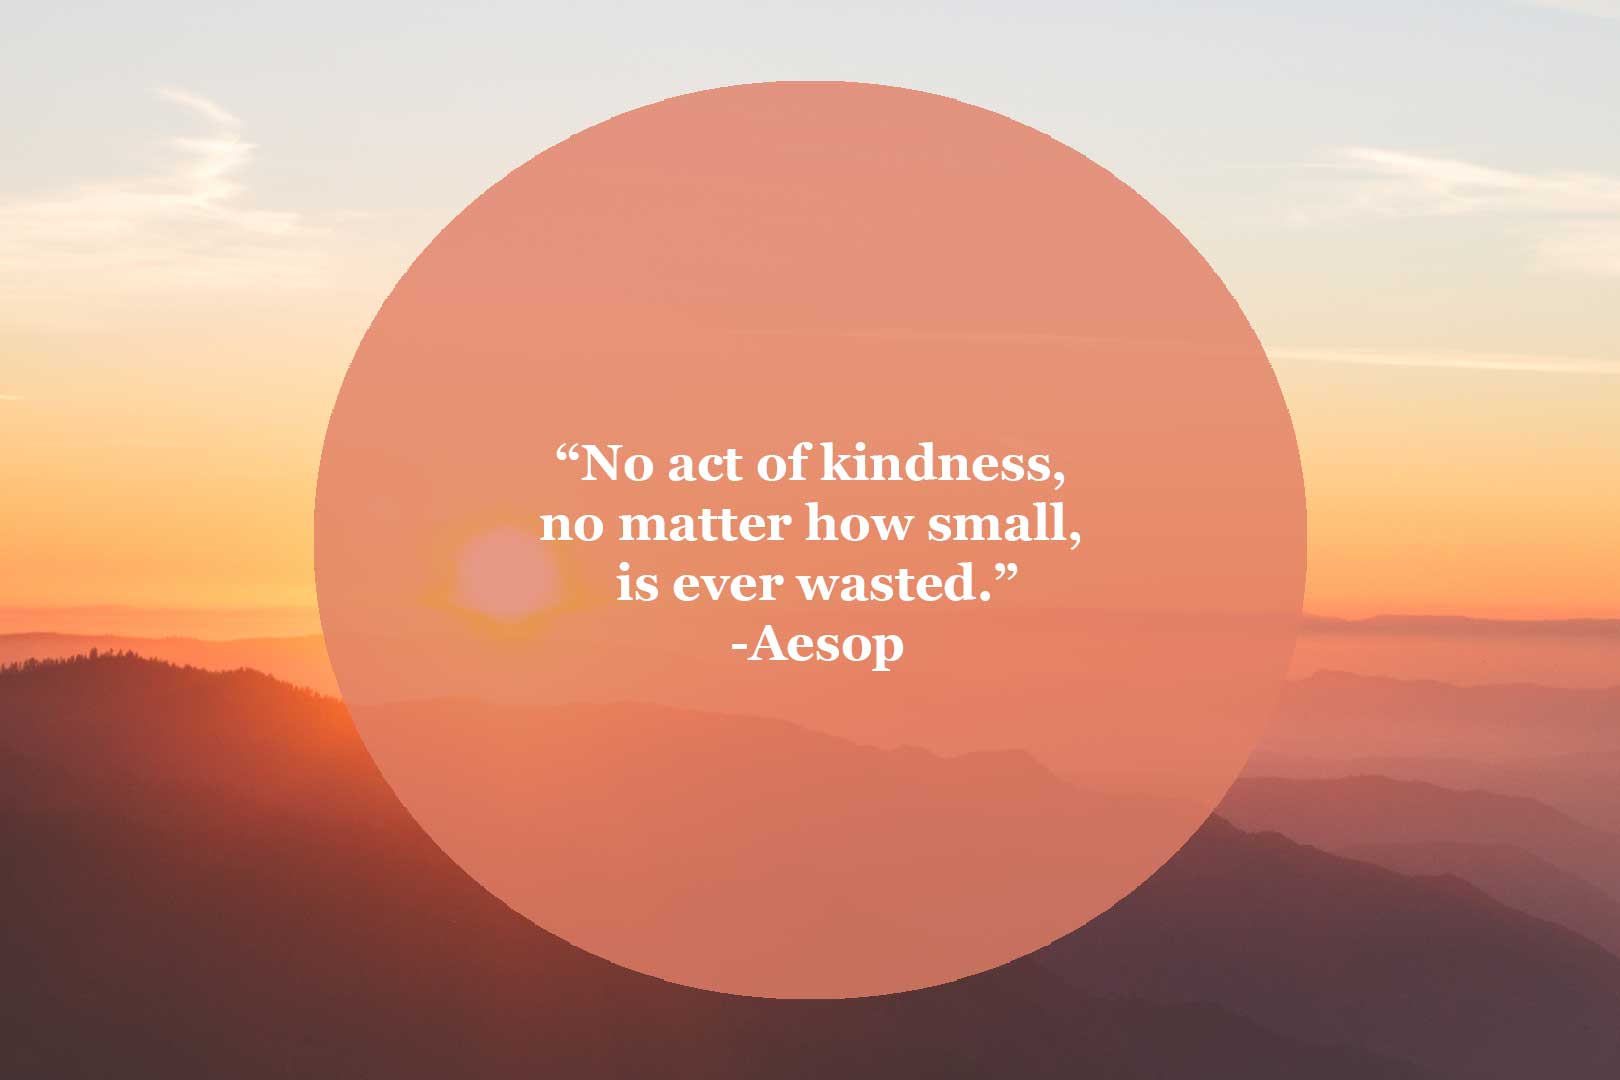 No act of kindness, no matter how small, is ever wasted. Aesop